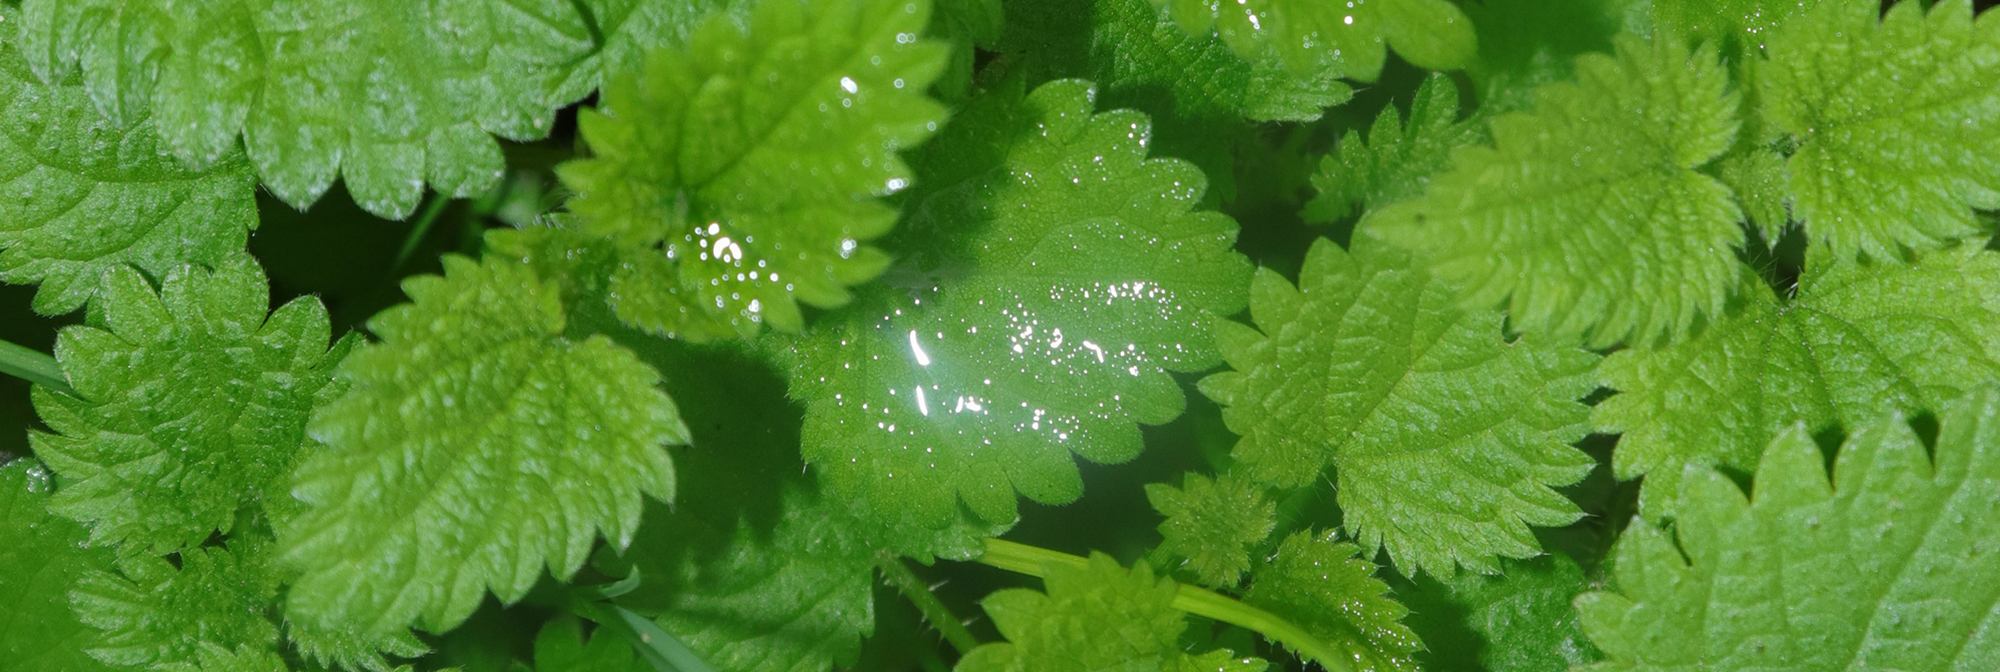 Photography by Martin Del Busto of nettles.